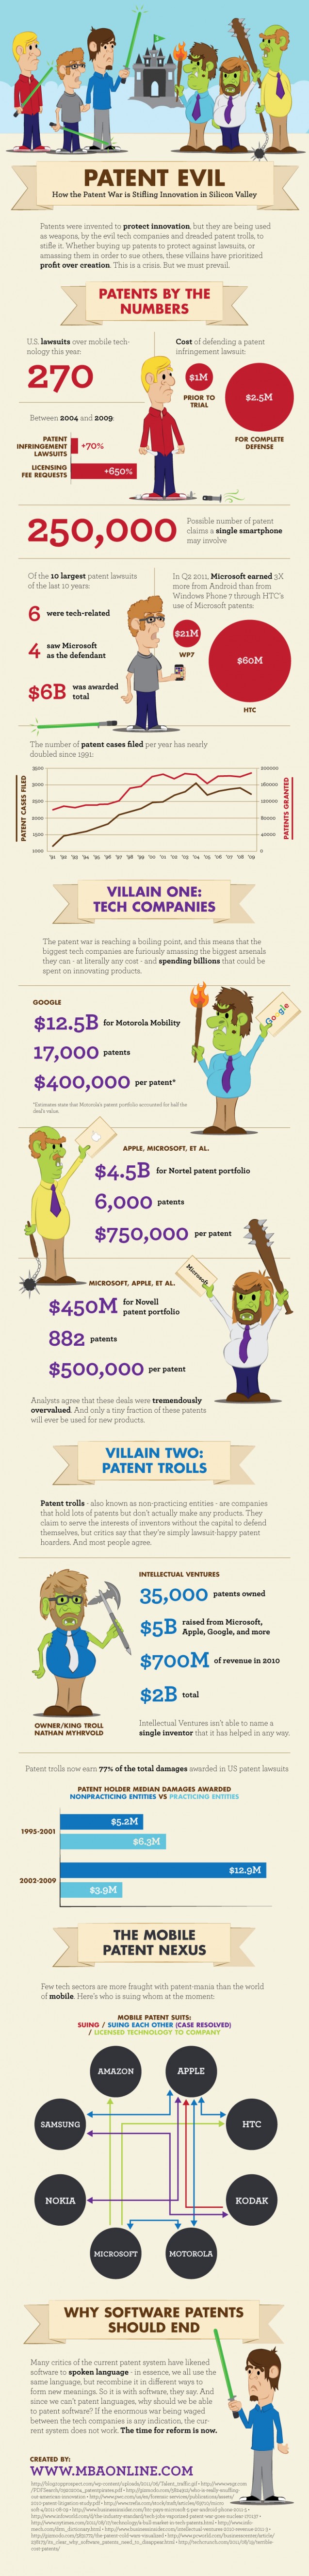 Infographic: The Casualties of Patent Wars (With Lightsabers!)